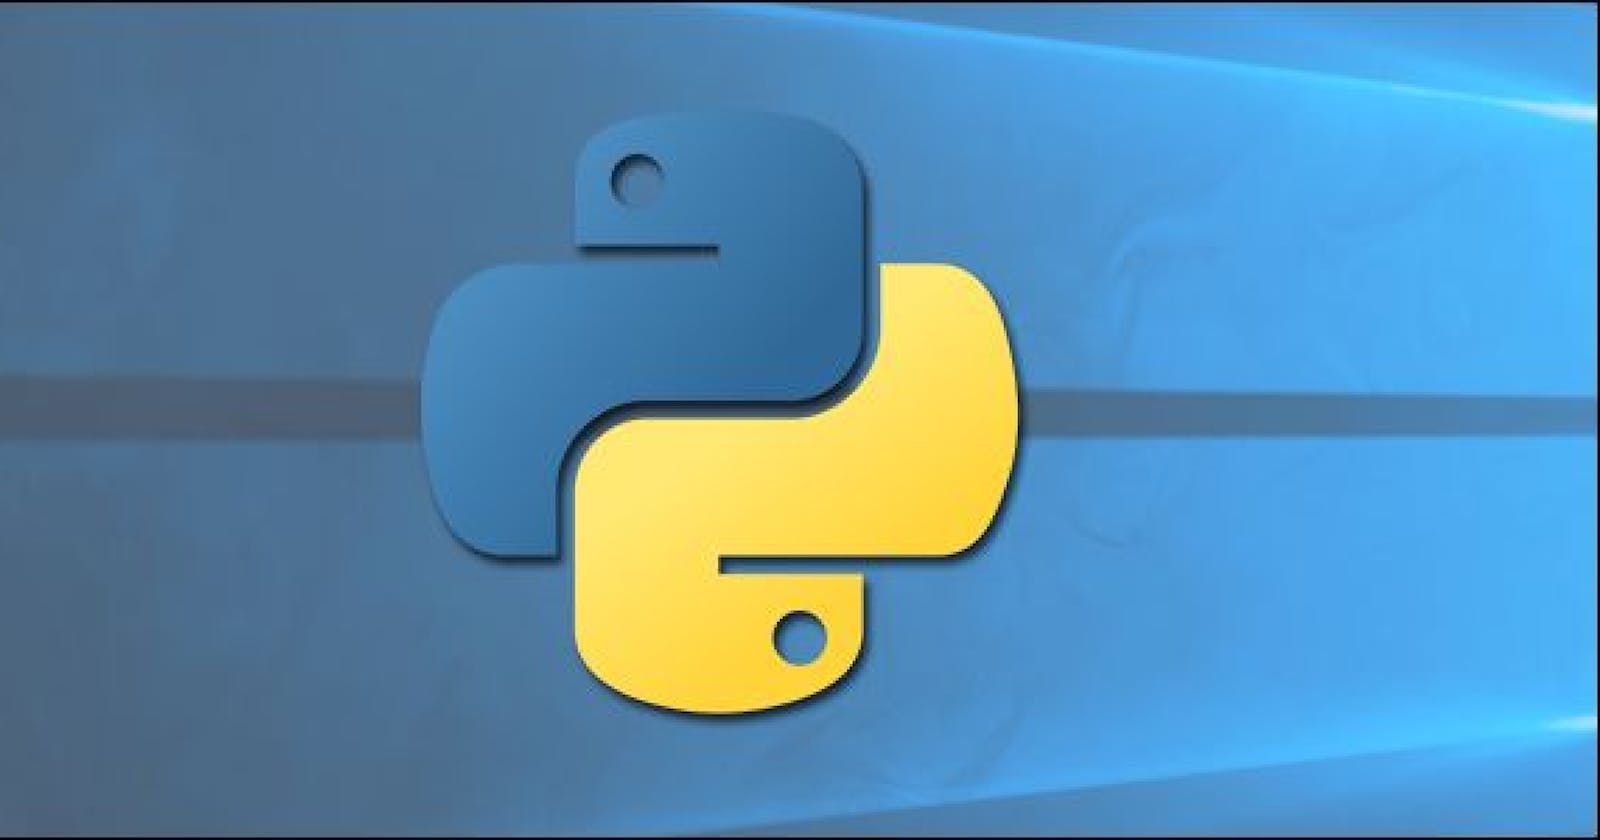 How to install Python from Scratch on Windows 10 ?